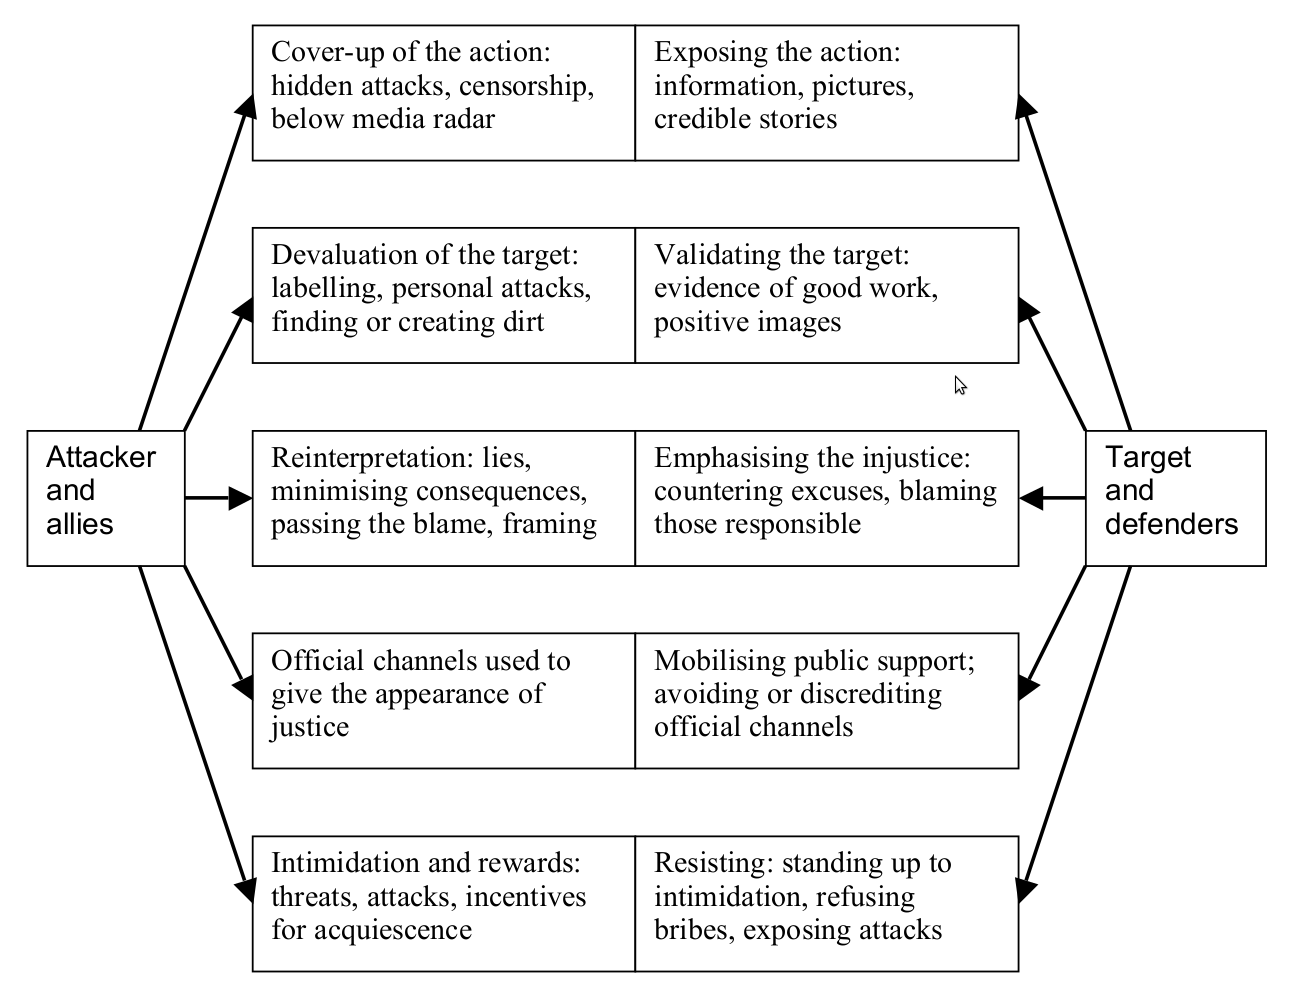 Five approaches for increasing outrage over injustice.png